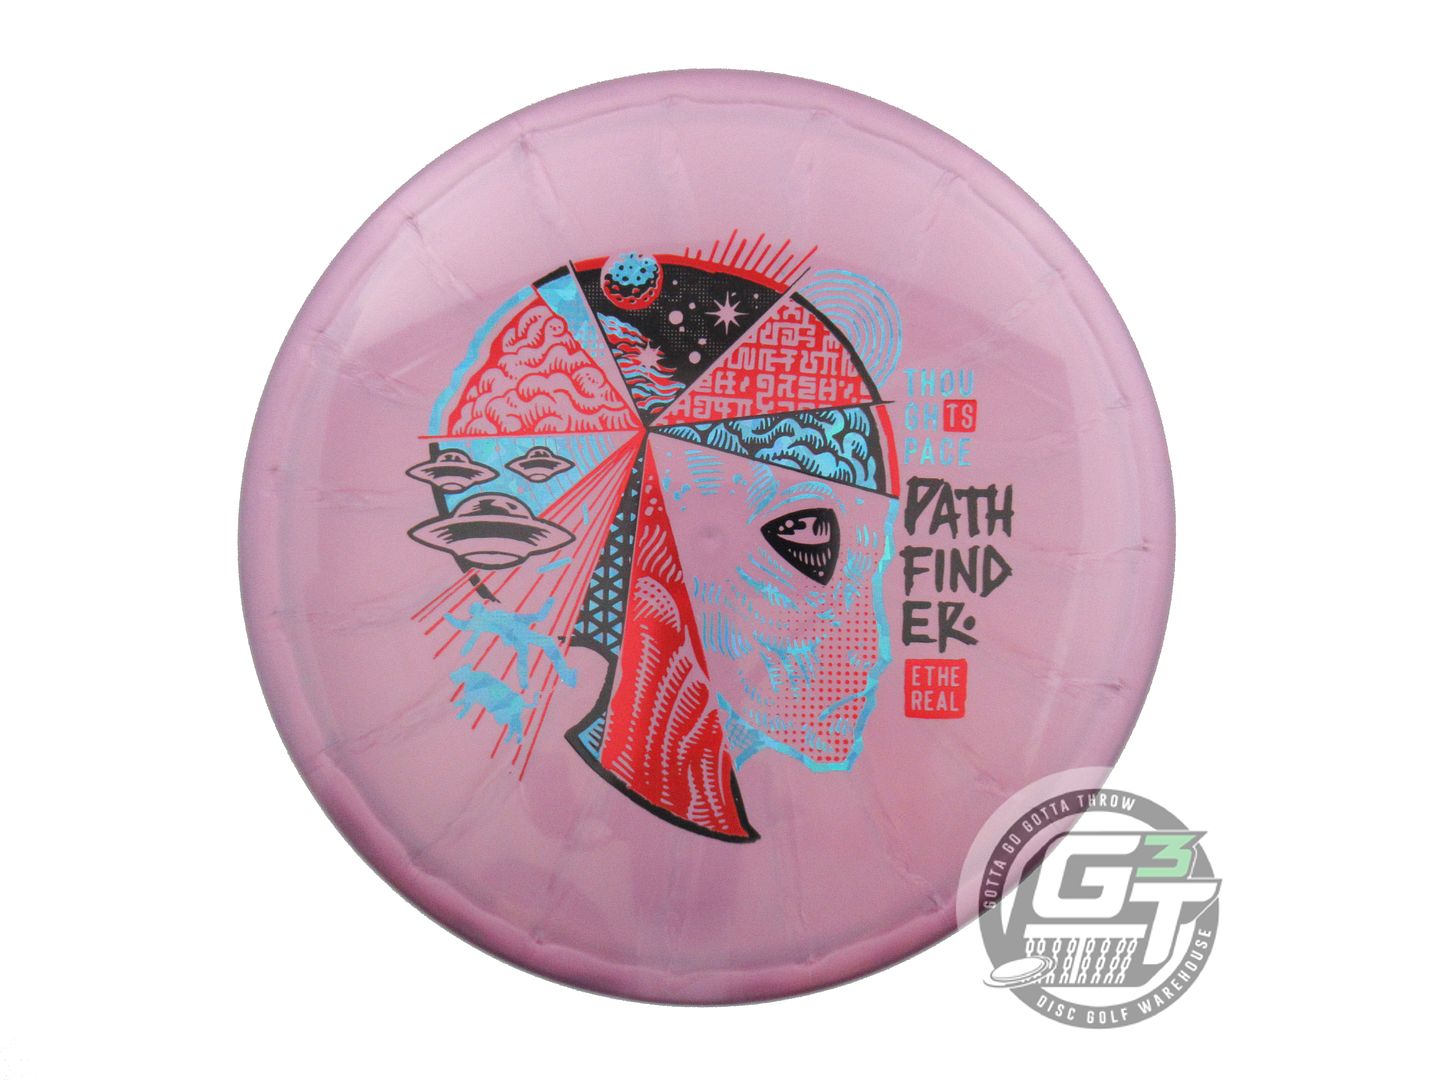 Thought Space Athletics Ethereal Pathfinder Midrange Golf Disc (Individually Listed)